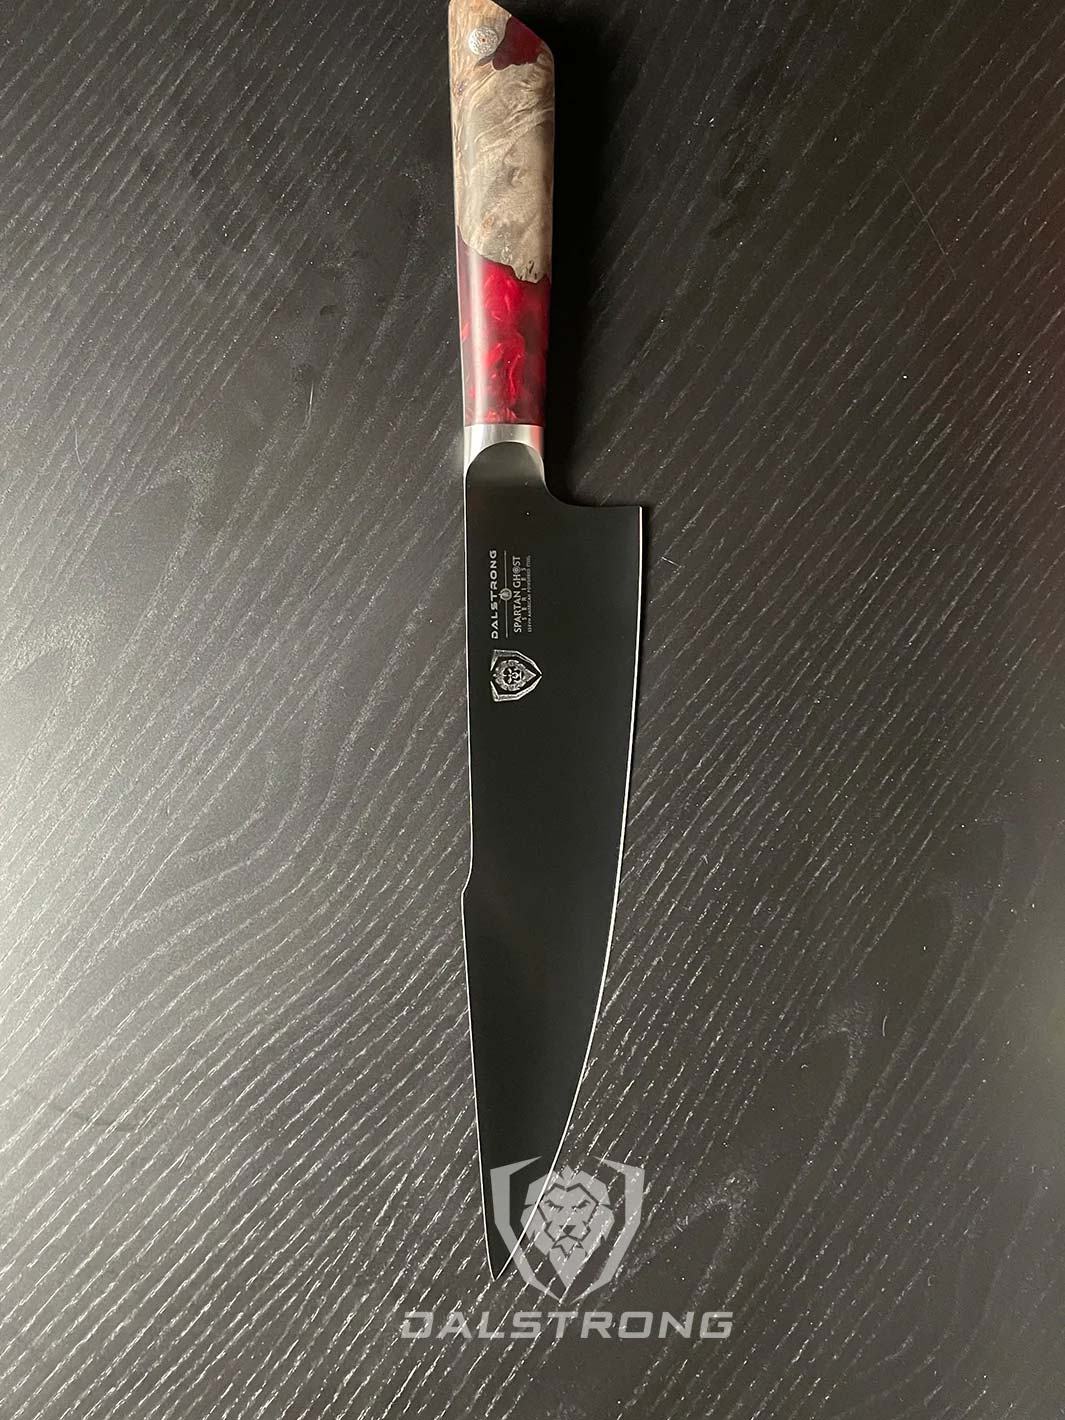 Dalstrong spartan ghost series 9.5 inch chef knife with resin and ash wood handle in a table.